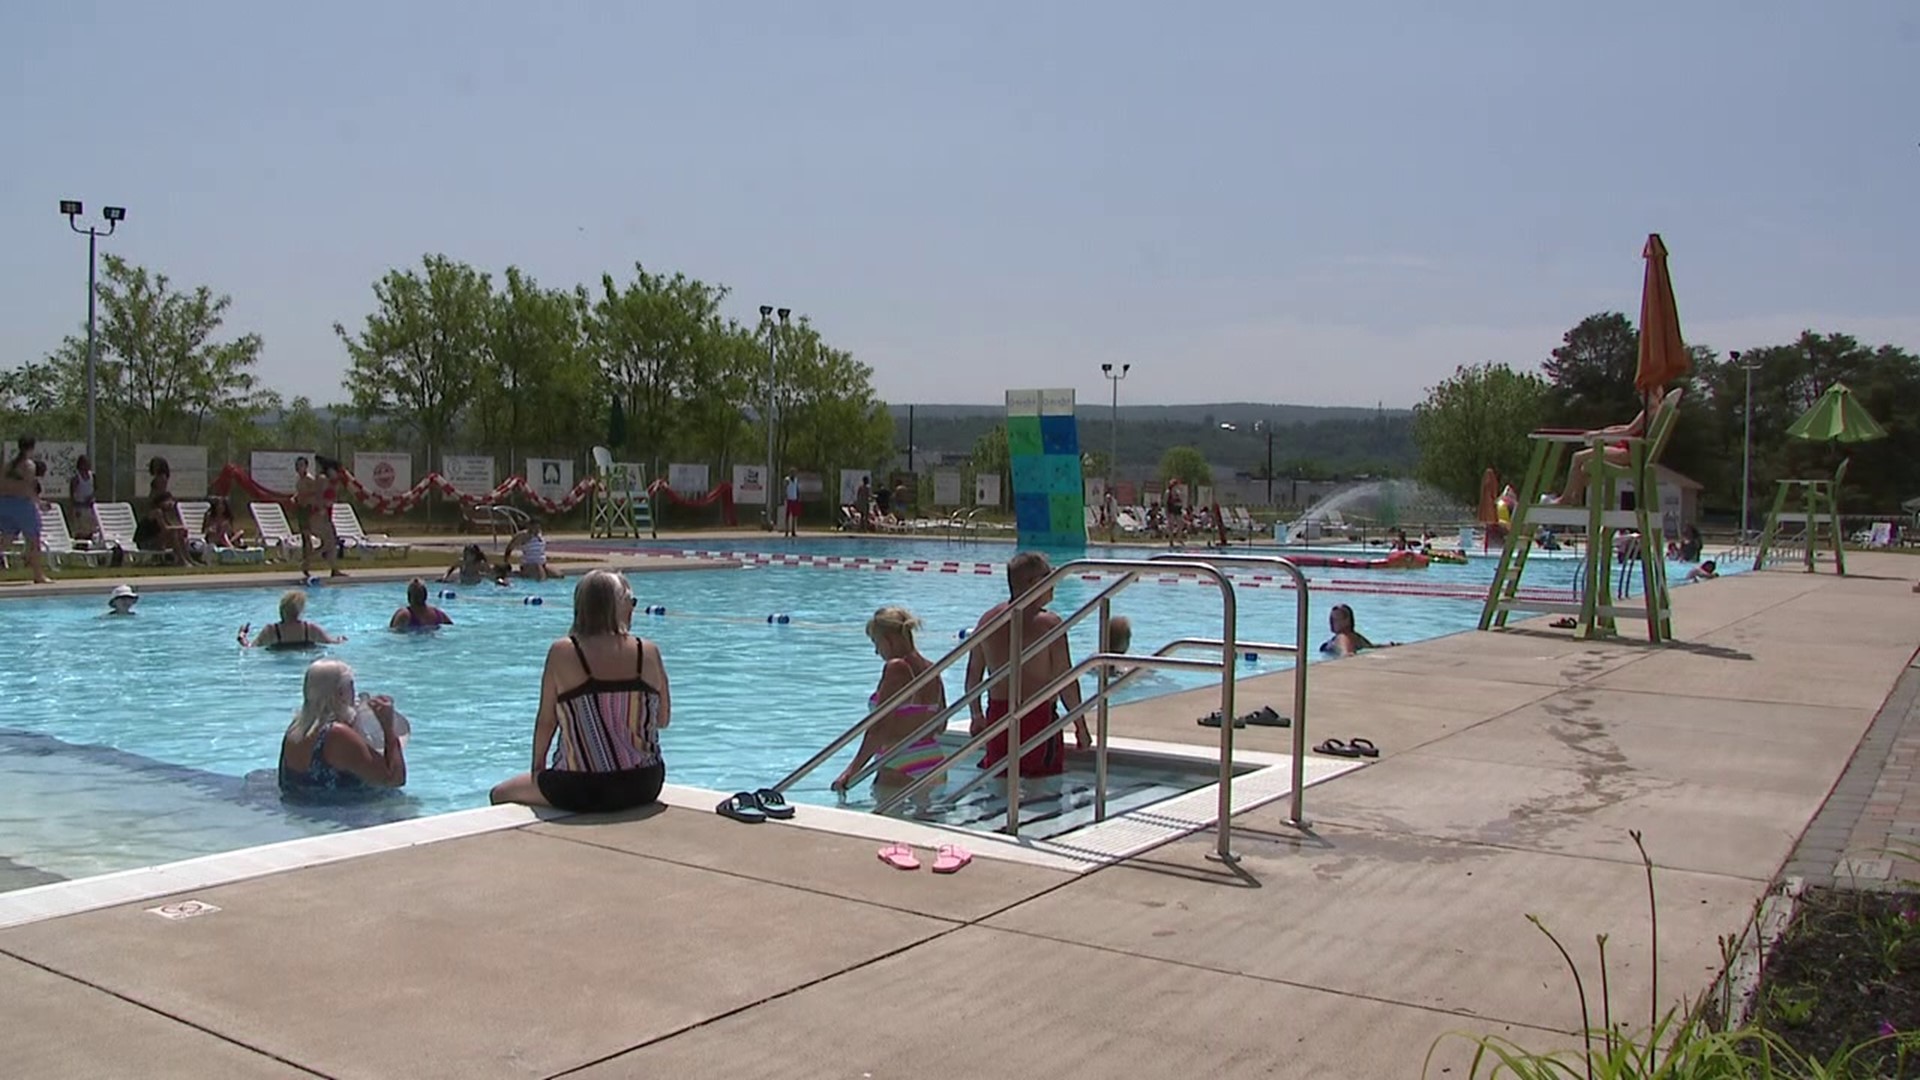 With temperatures in the high 80s in parts of our area, many people spent the holiday swimming.